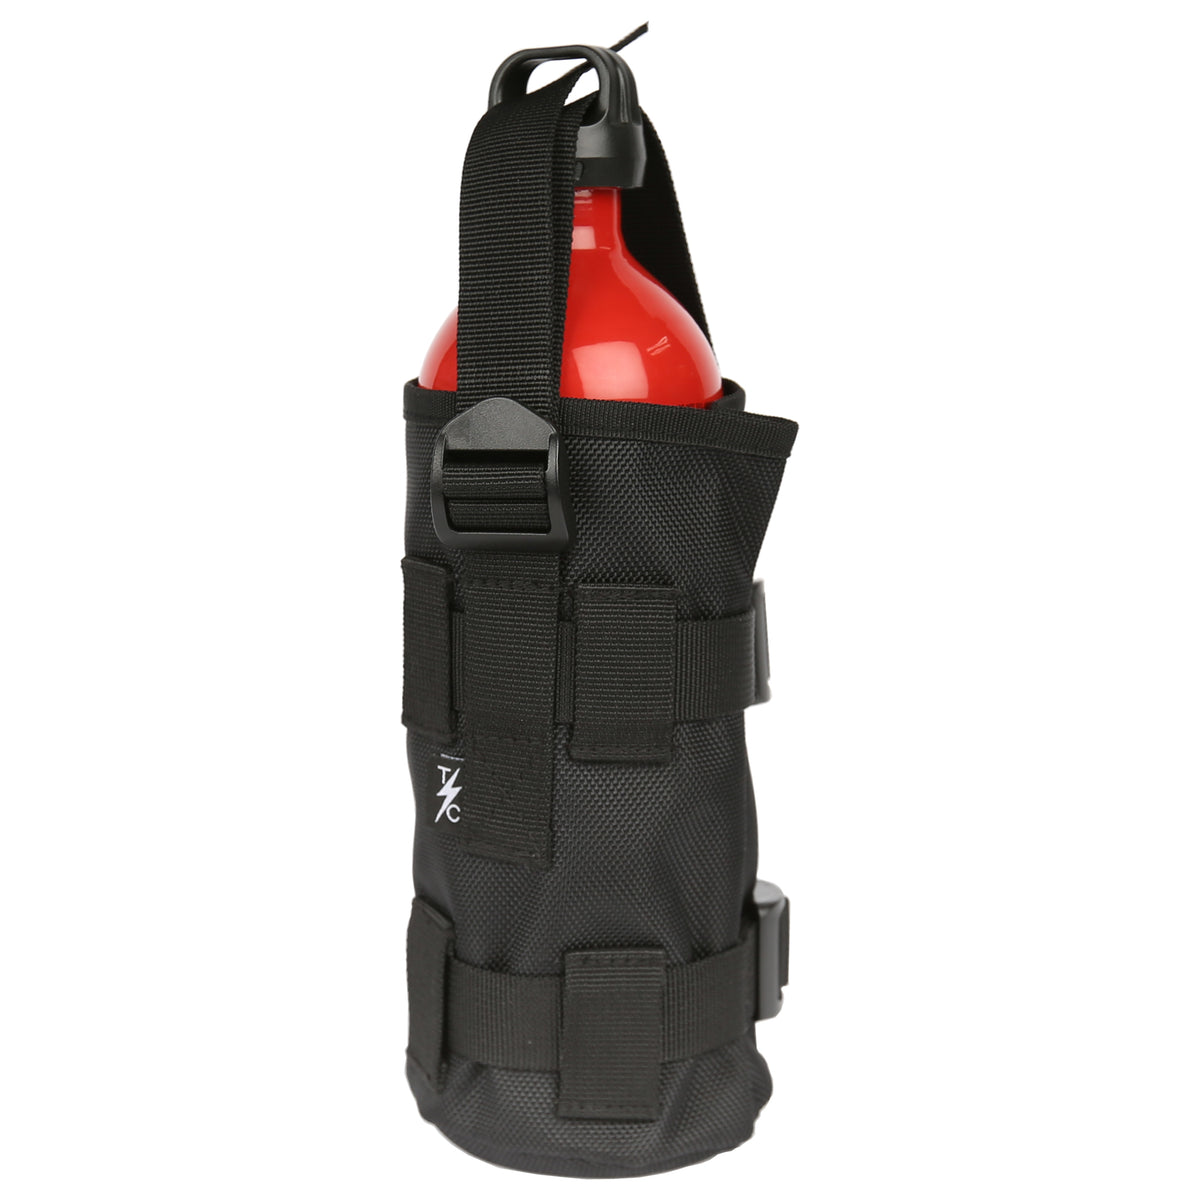 Thrashin Bottle Holster - Works with old style Essential Saddlebags